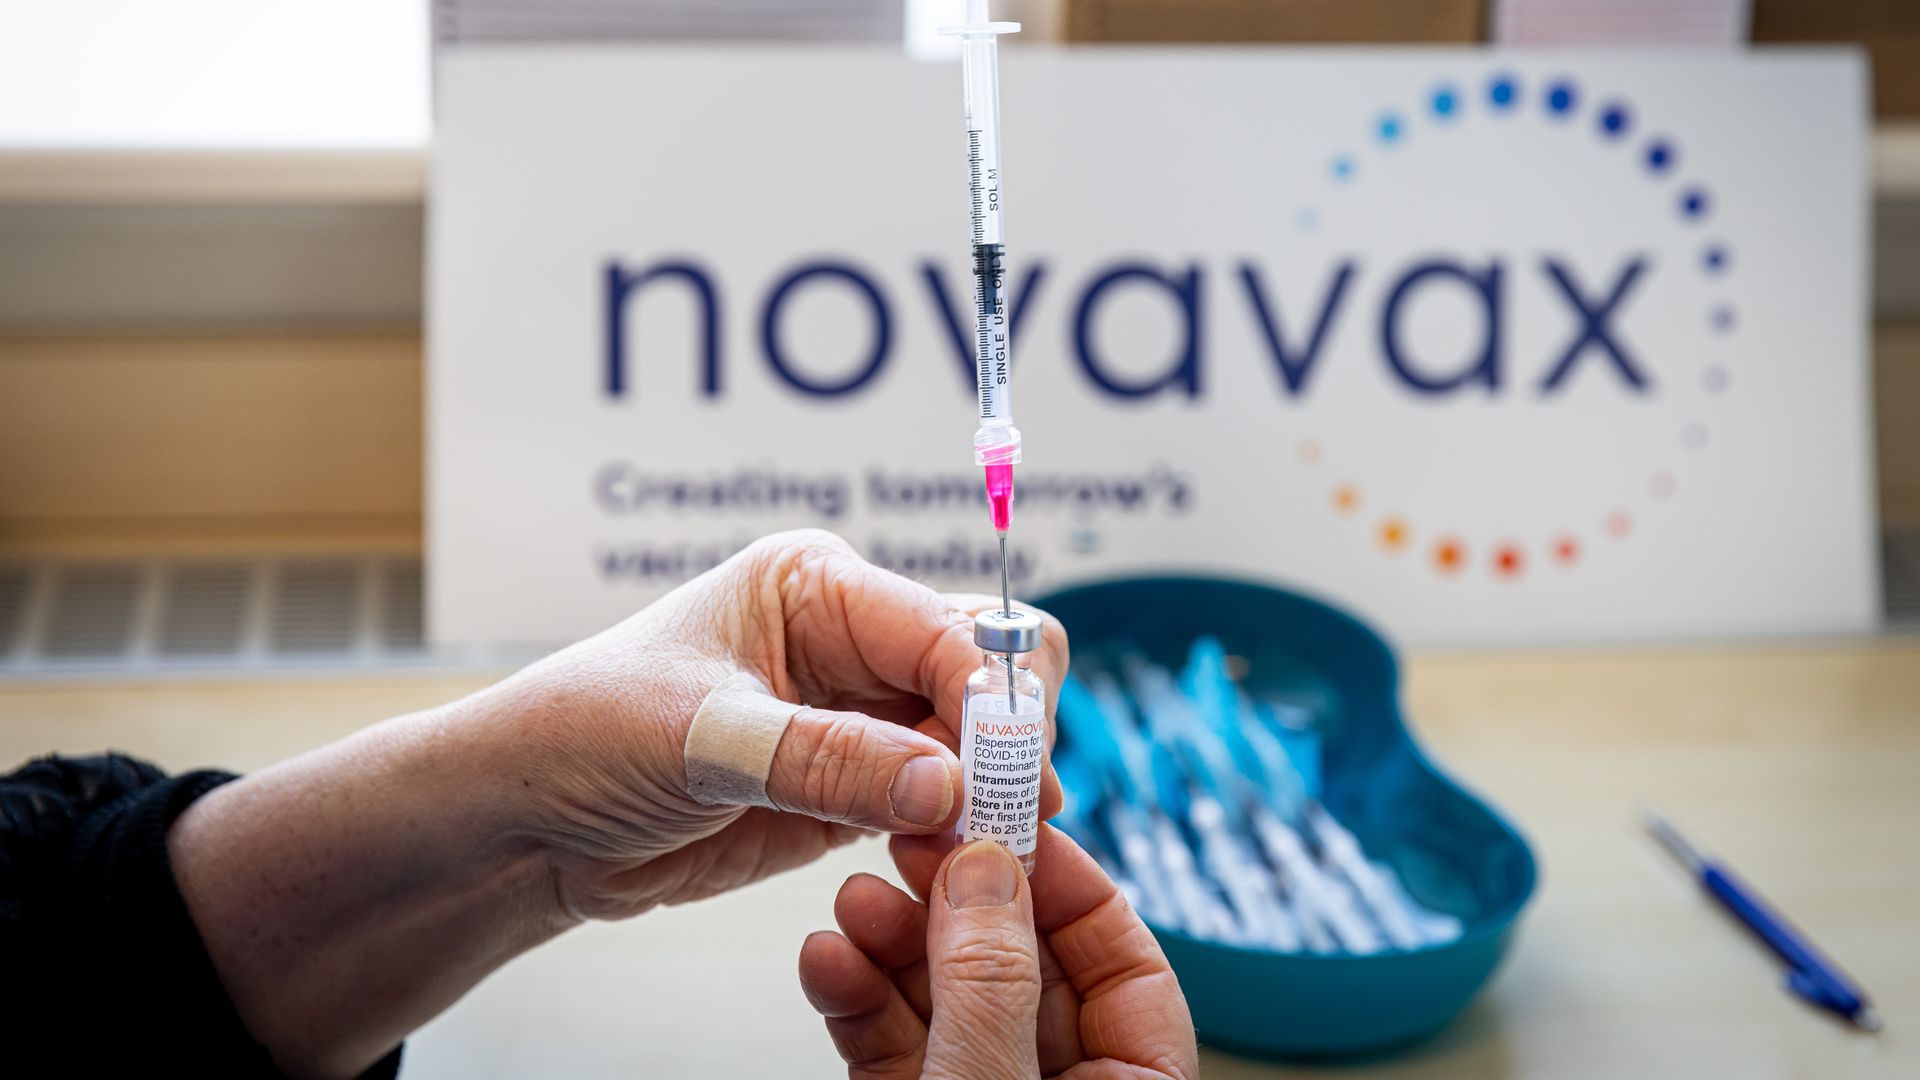 Picture of hands holding a Novavax vaccine